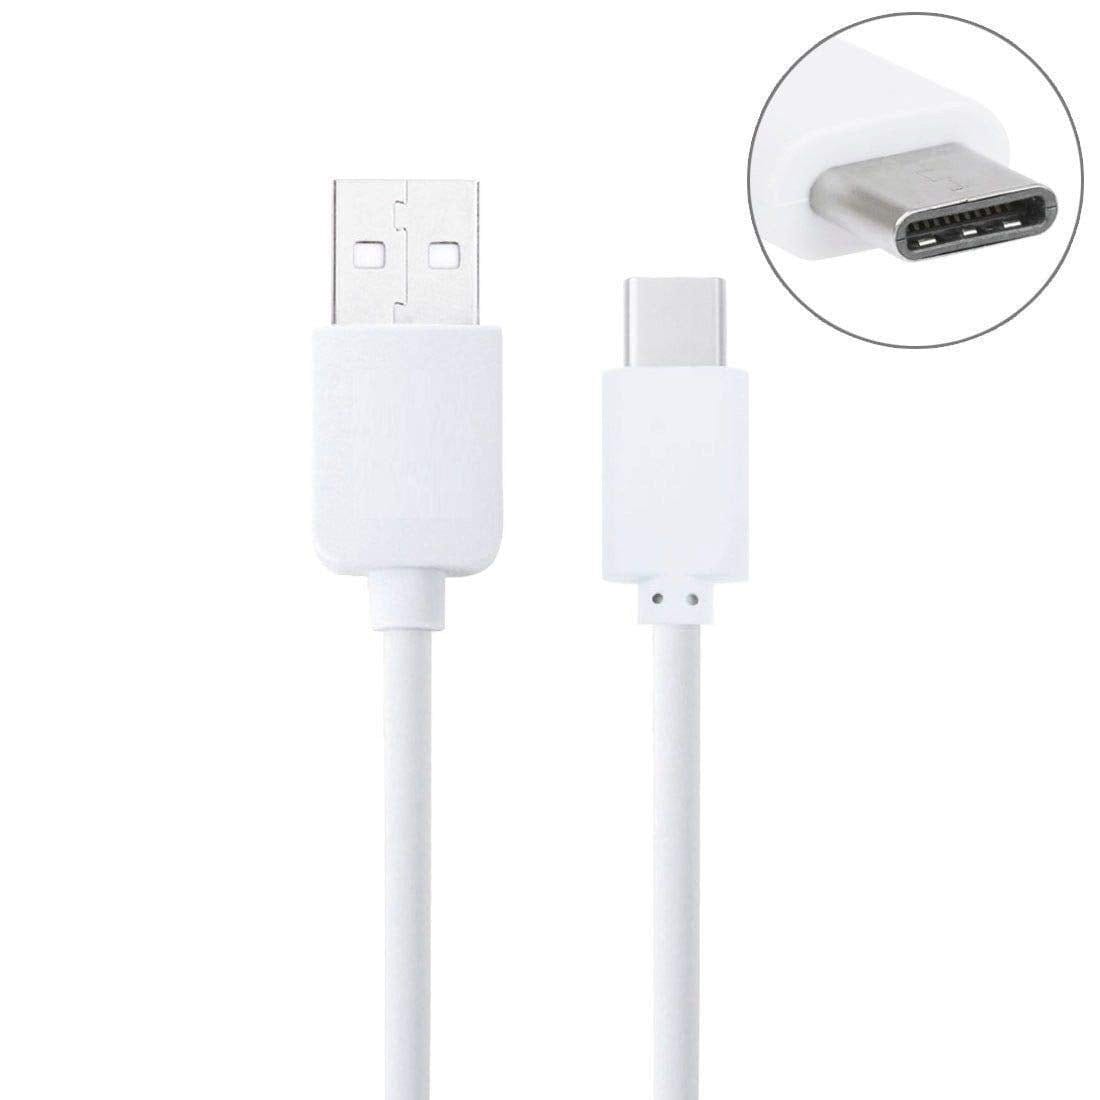 Samsung Galaxy M31 USB Cable Type C Charging Cable In Car White - 25 CM Short - SmartPhoneGadgetUK